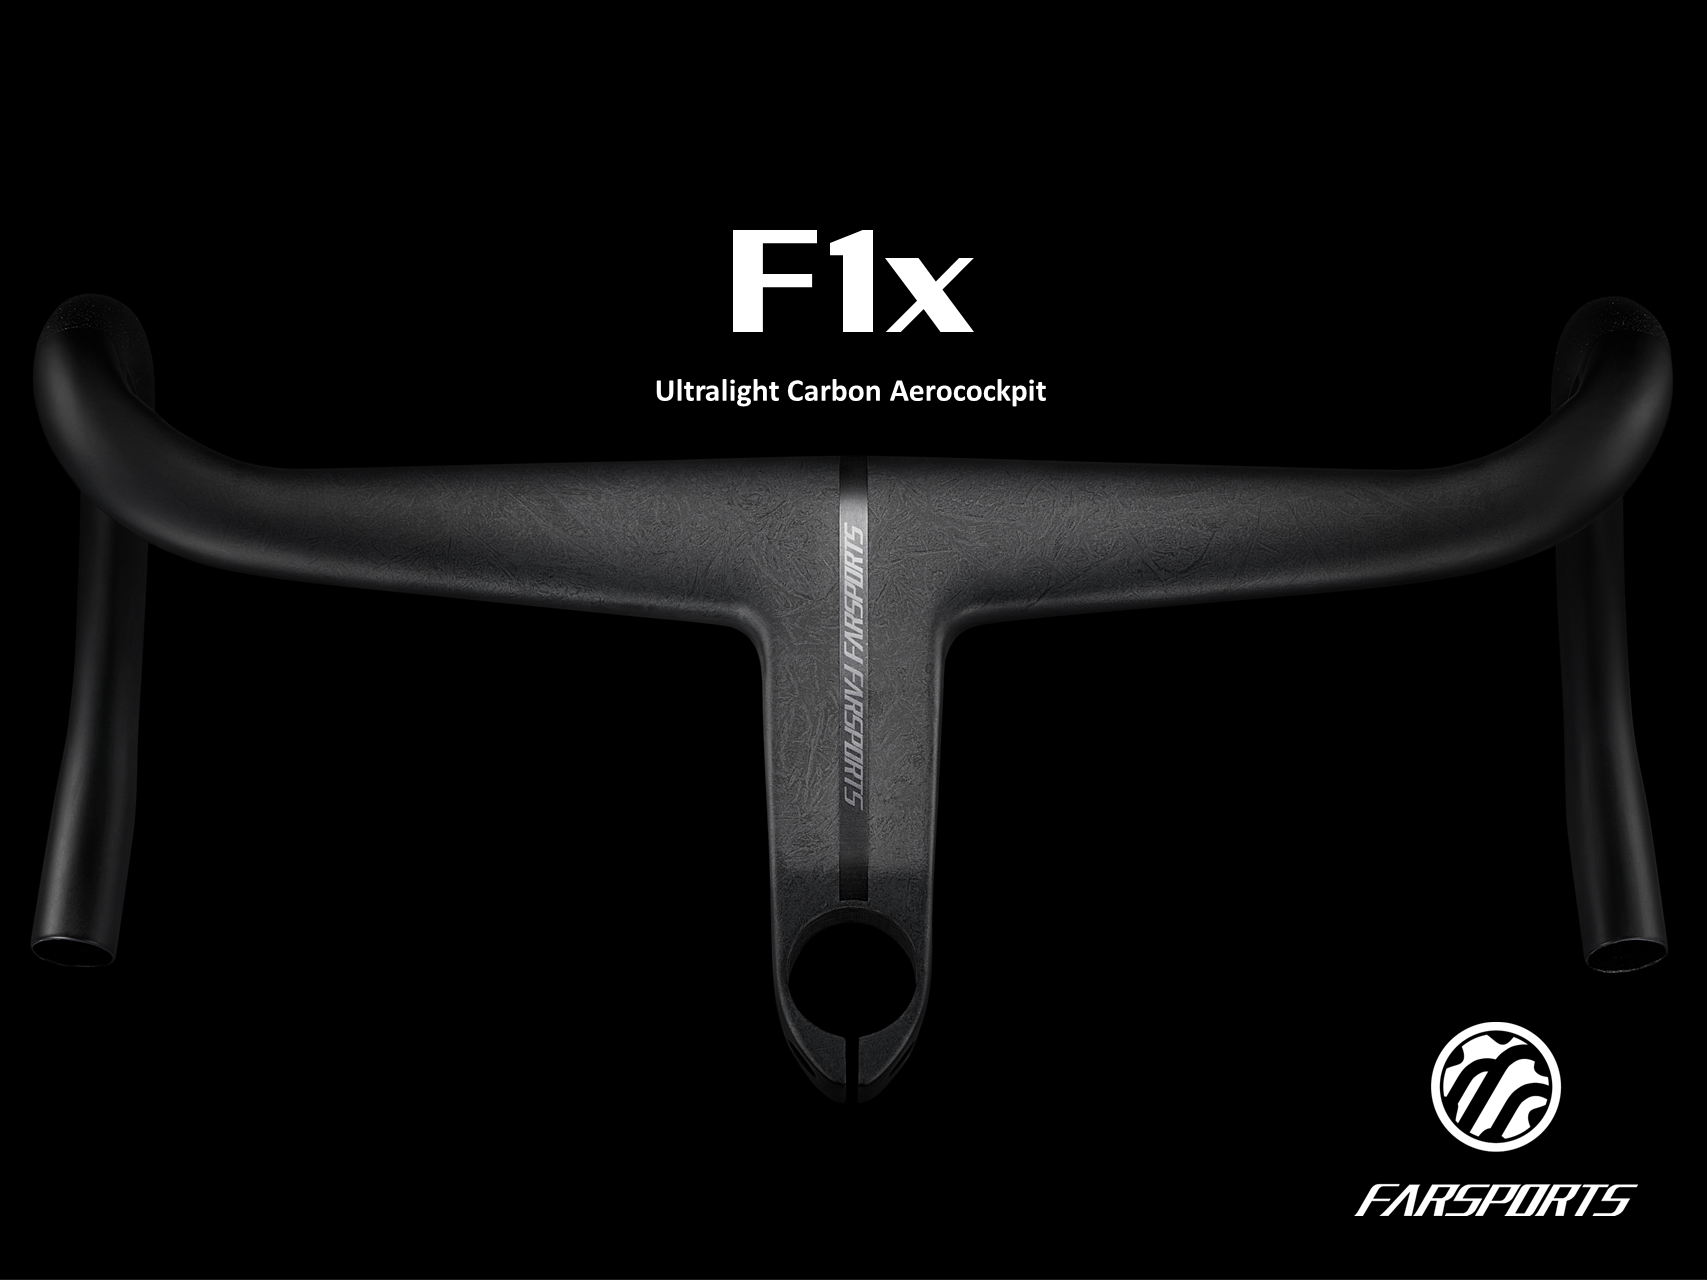 The brand new FARSPORTS F1x Handlebar is now available and BLACK FRIDAY announcement